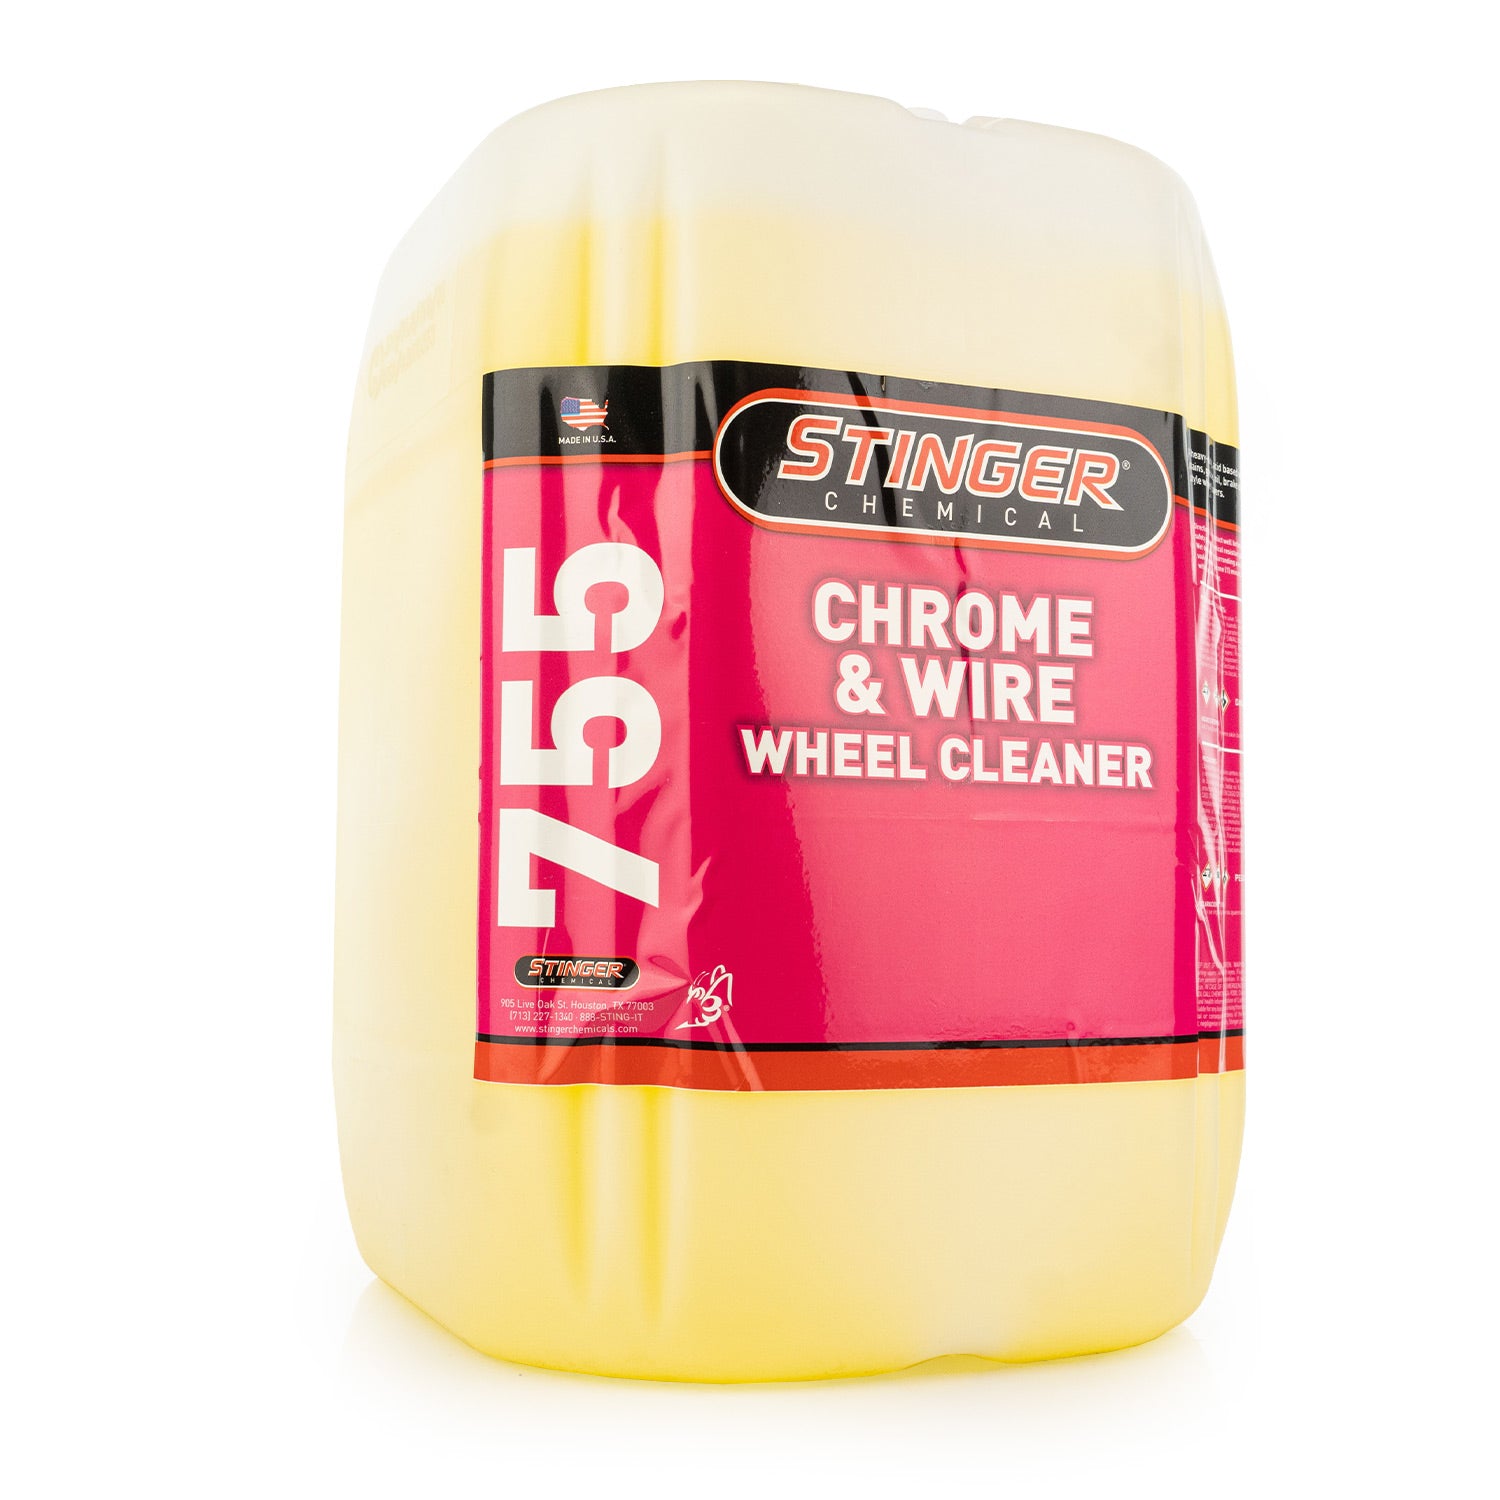 Tire and Wheel Cleaner (Concentrate) - 1 Gallon, Wheel, Cleaning and Care, Chemical Product